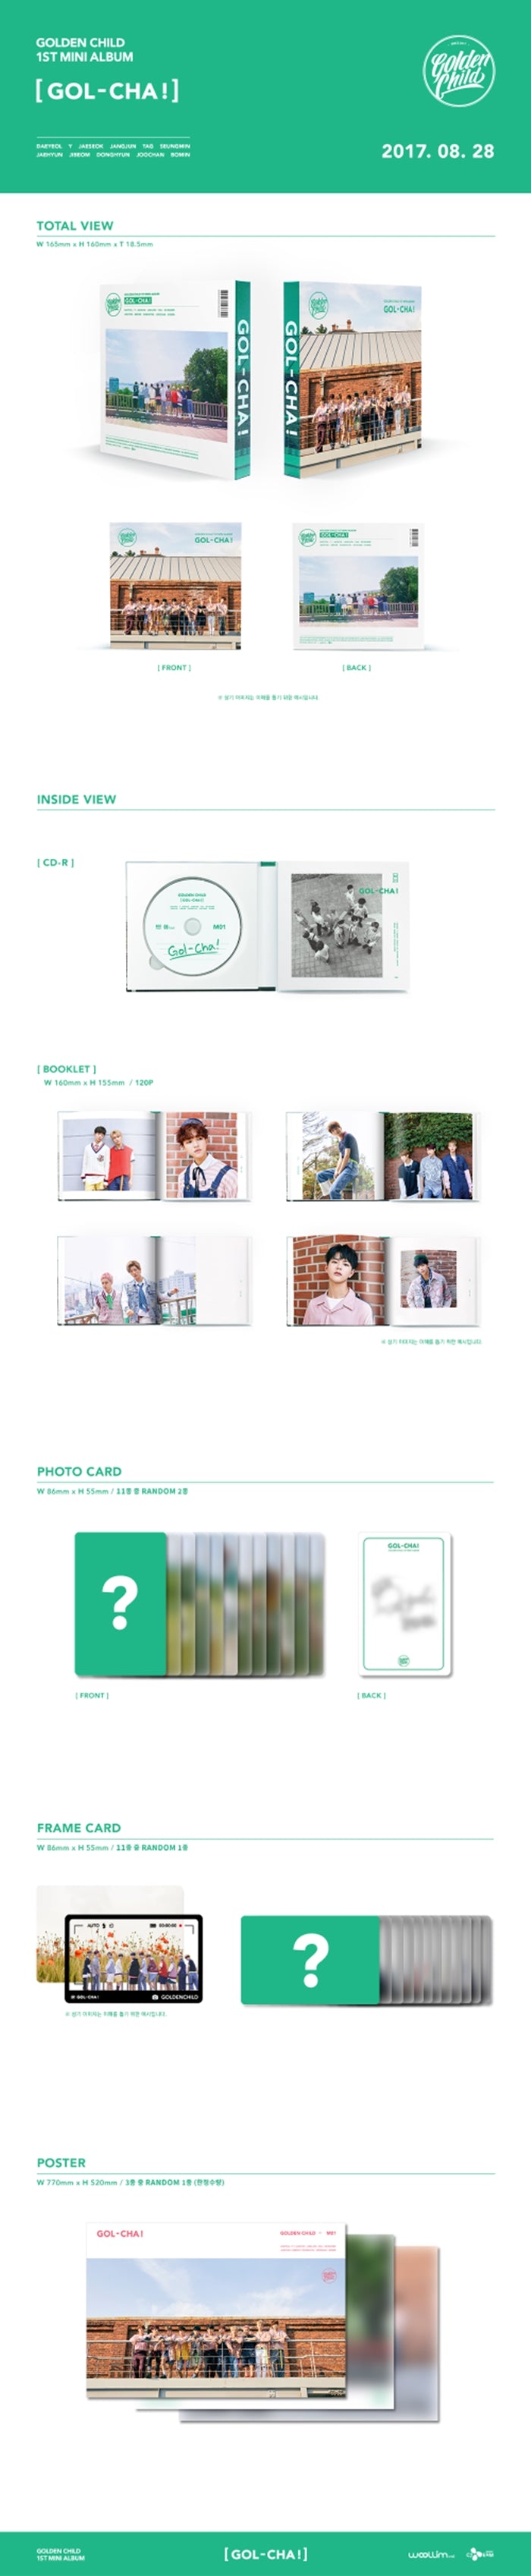 1 CD
1 Booklet (120 pages)
2 Photo Cards
1 Frame